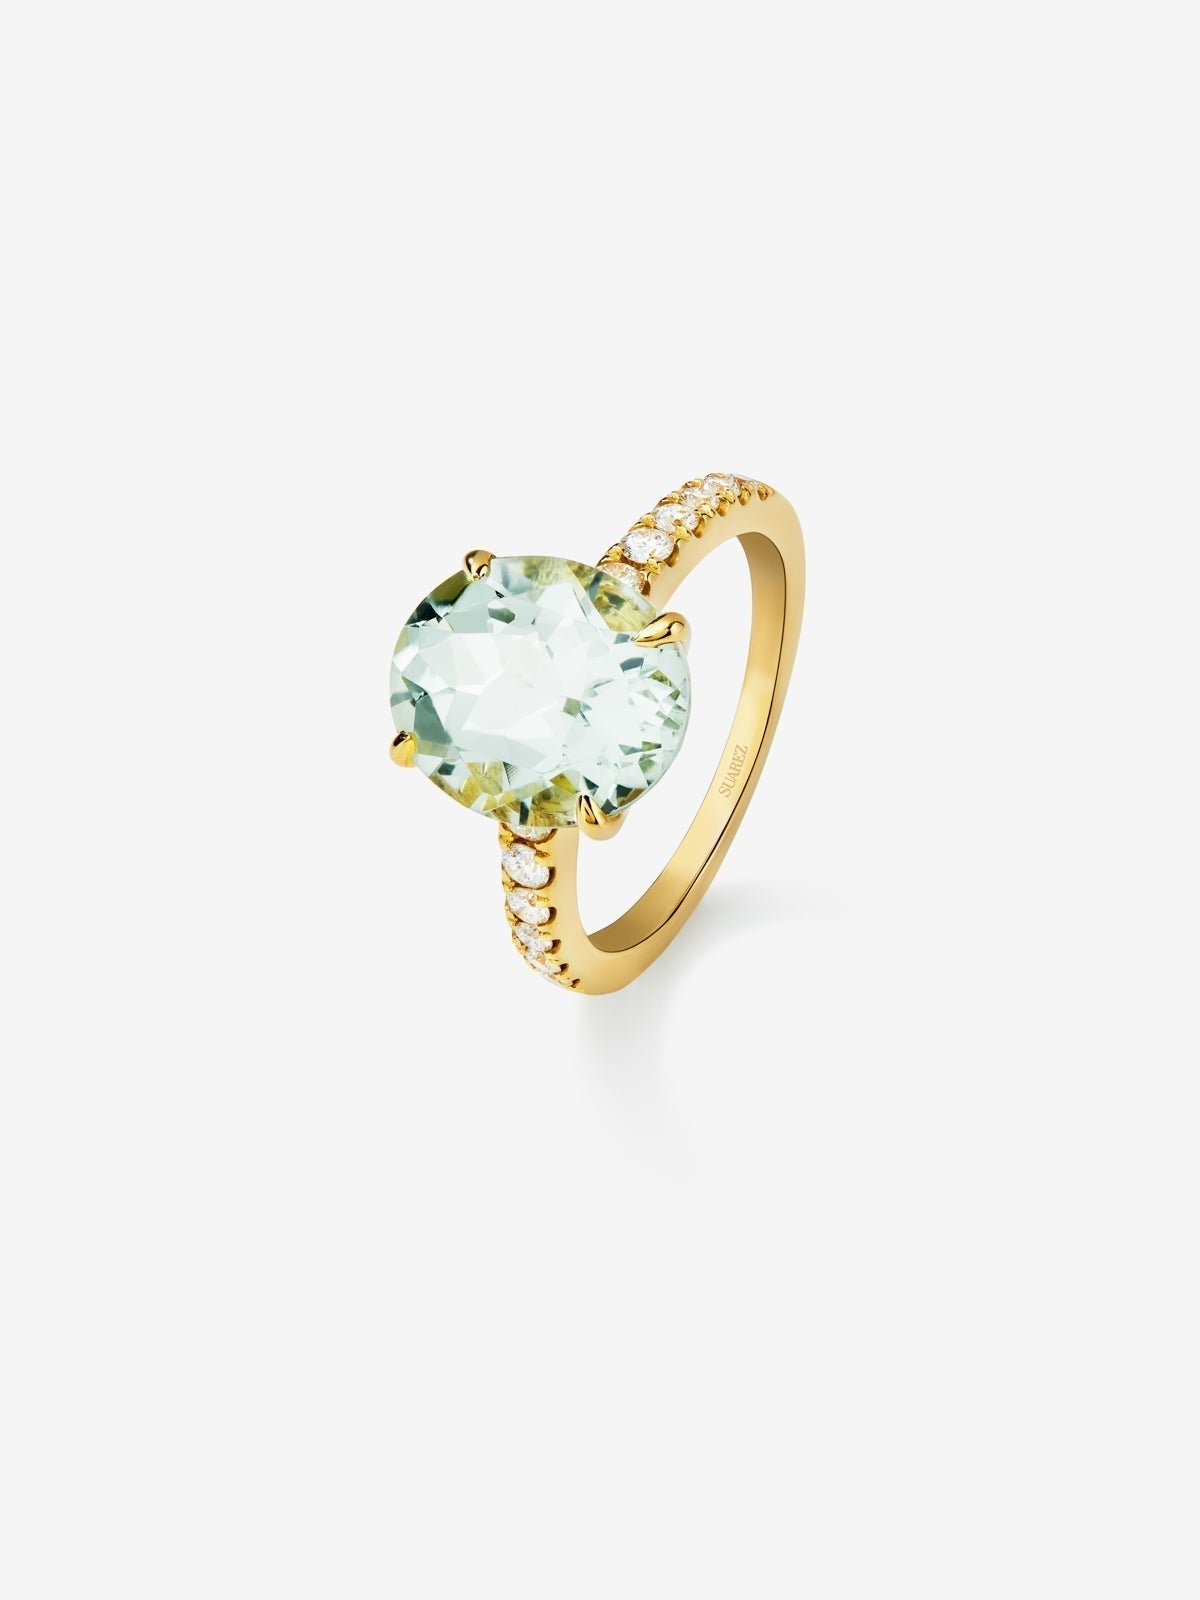 18K yellow gold ring with oval-cut green amethyst of 4.34 cts and 12 brilliant-cut diamonds with a total of 0.29 cts